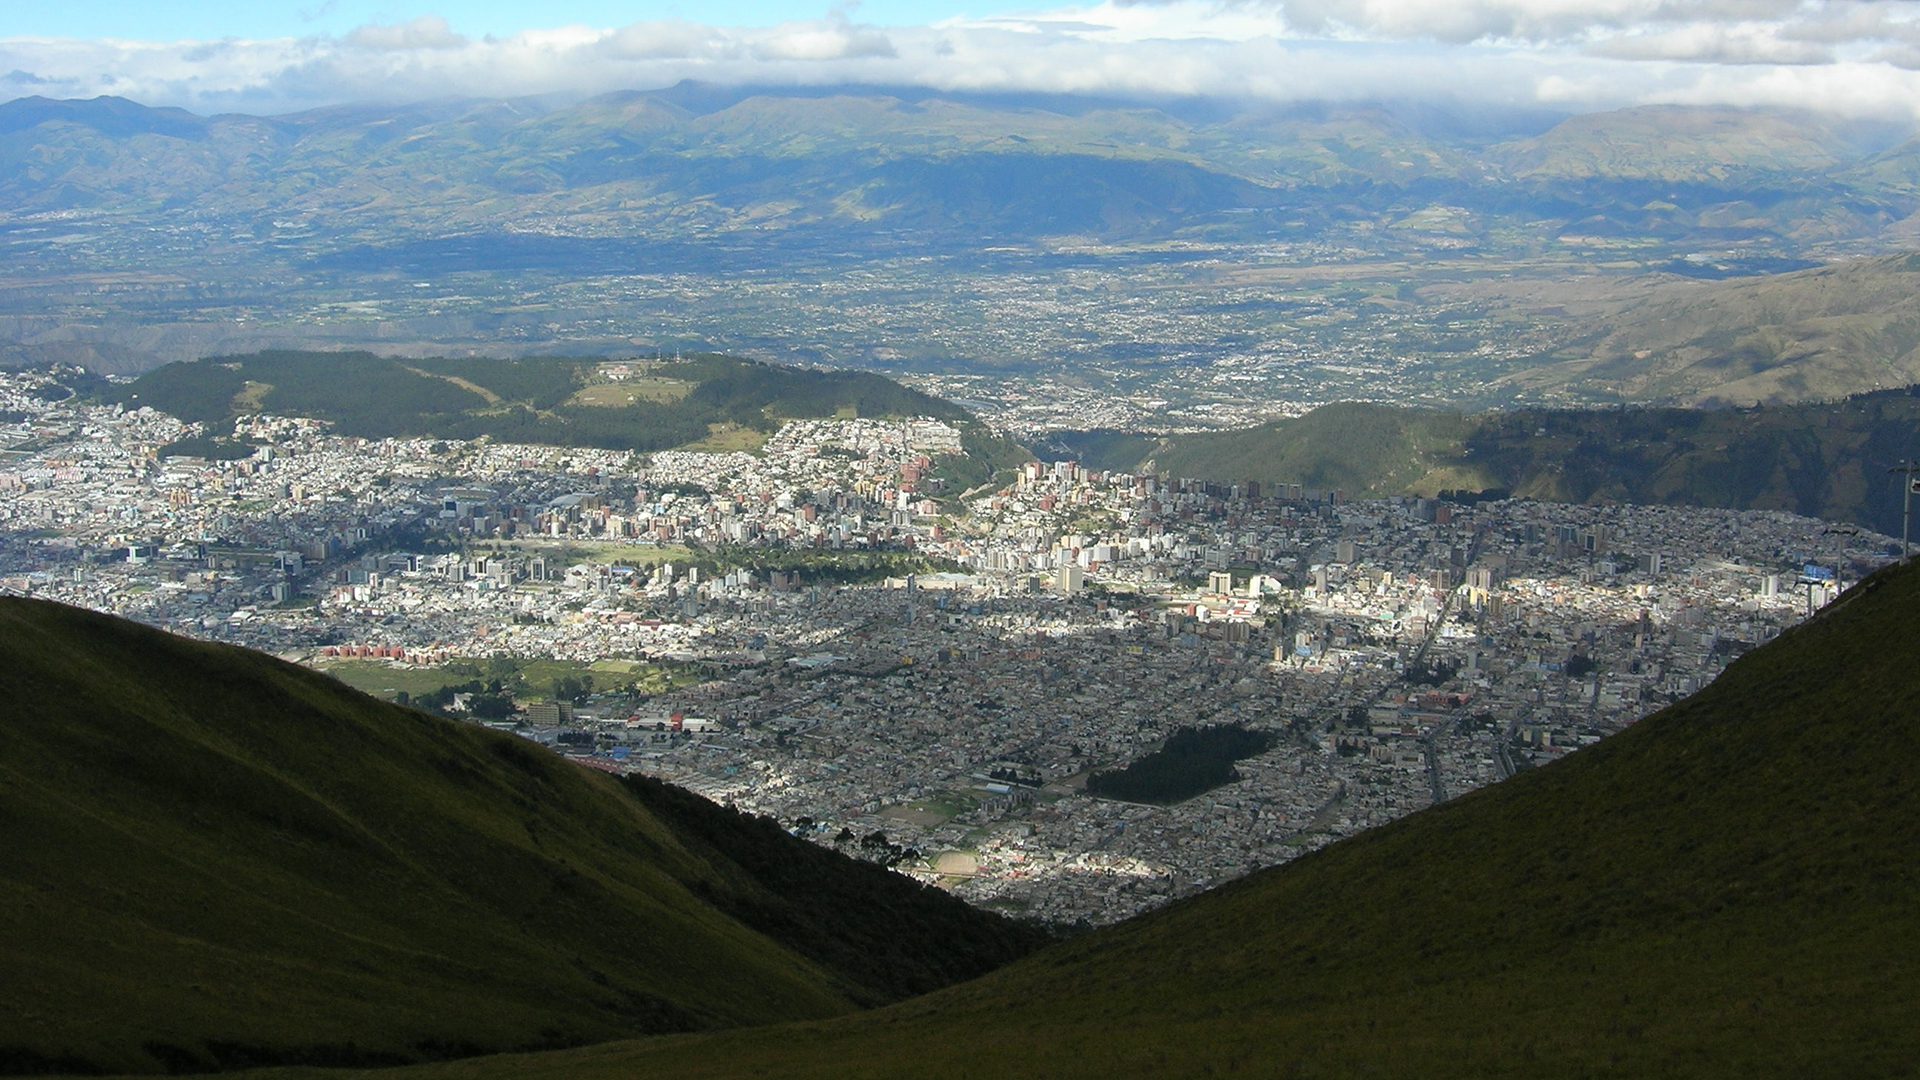 Beautiful Quito, the capital of Ecuador, from a distance. Visit Quito in an alternative way with Impactful Travel's Quito Walking Tour